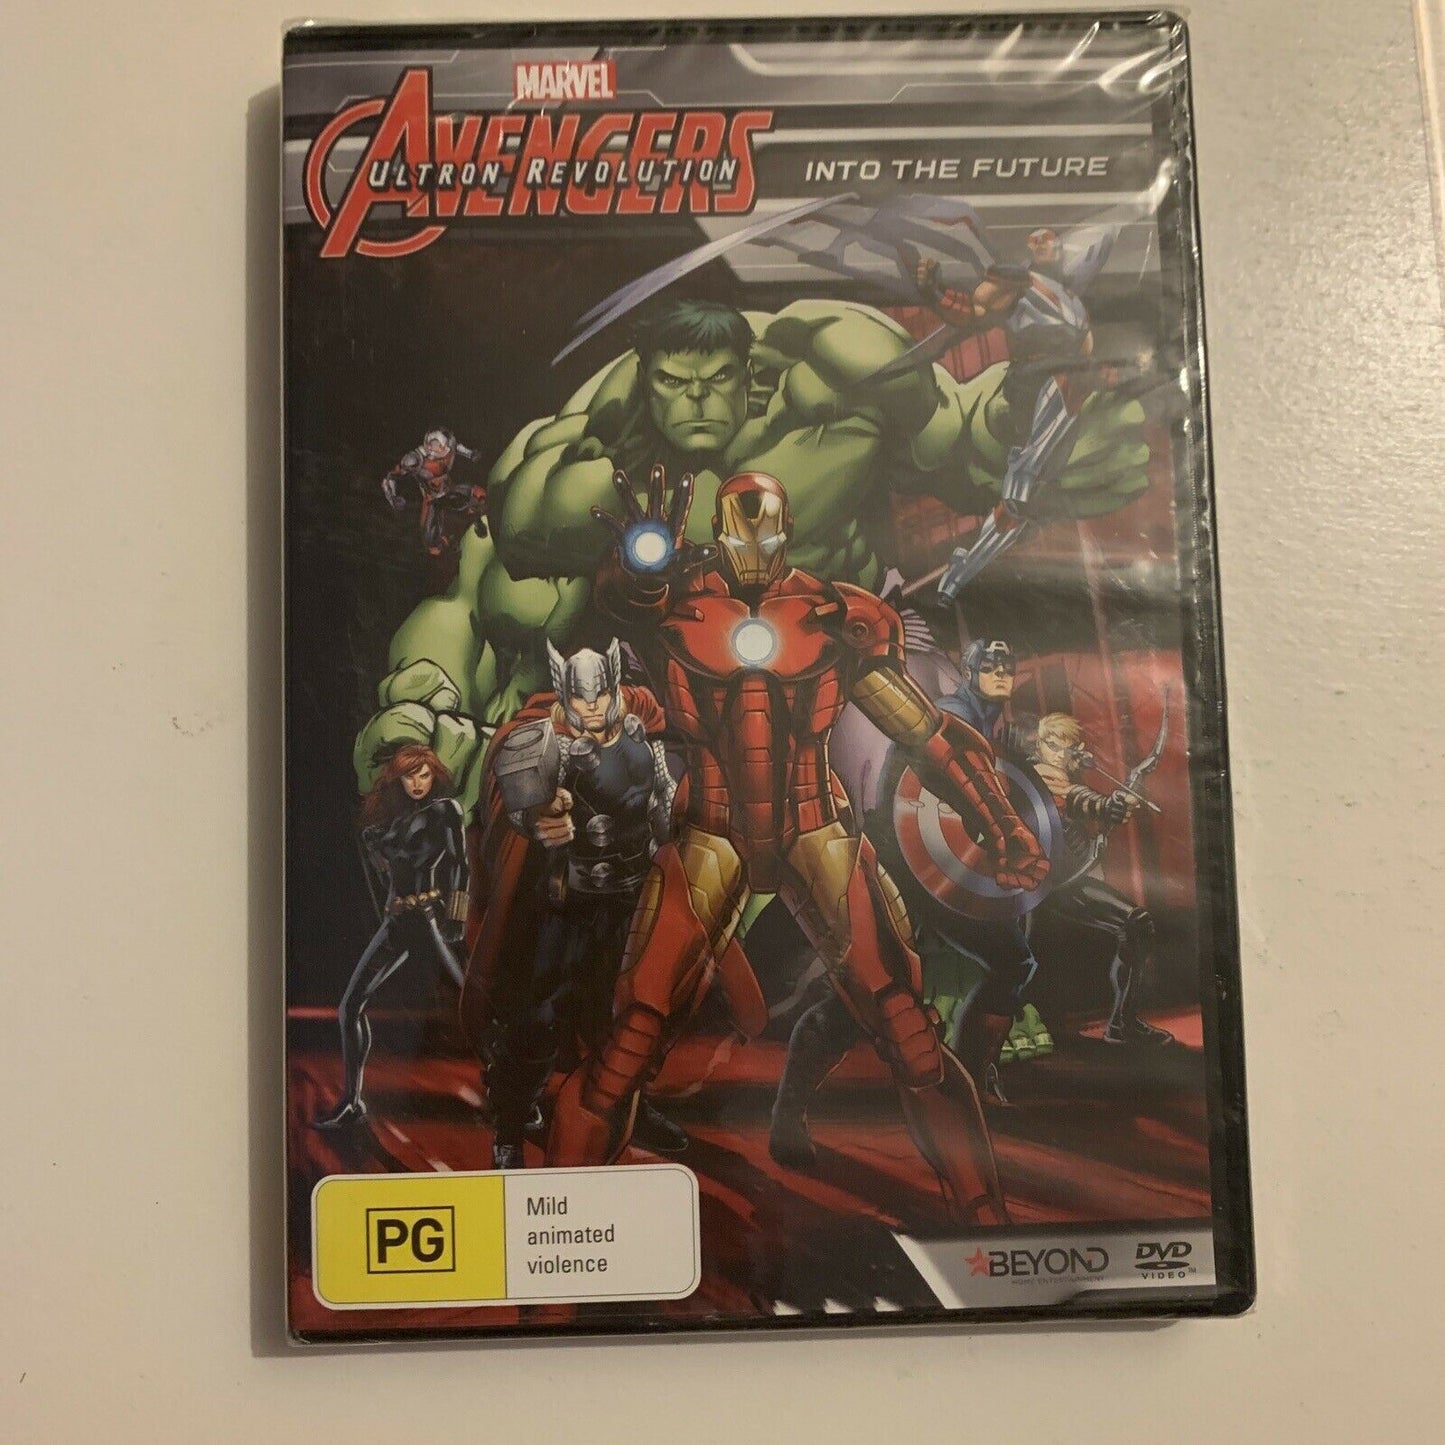 *New Sealed* Avengers Ultron Revolution - Into The Future (DVD, 2017) Region 4